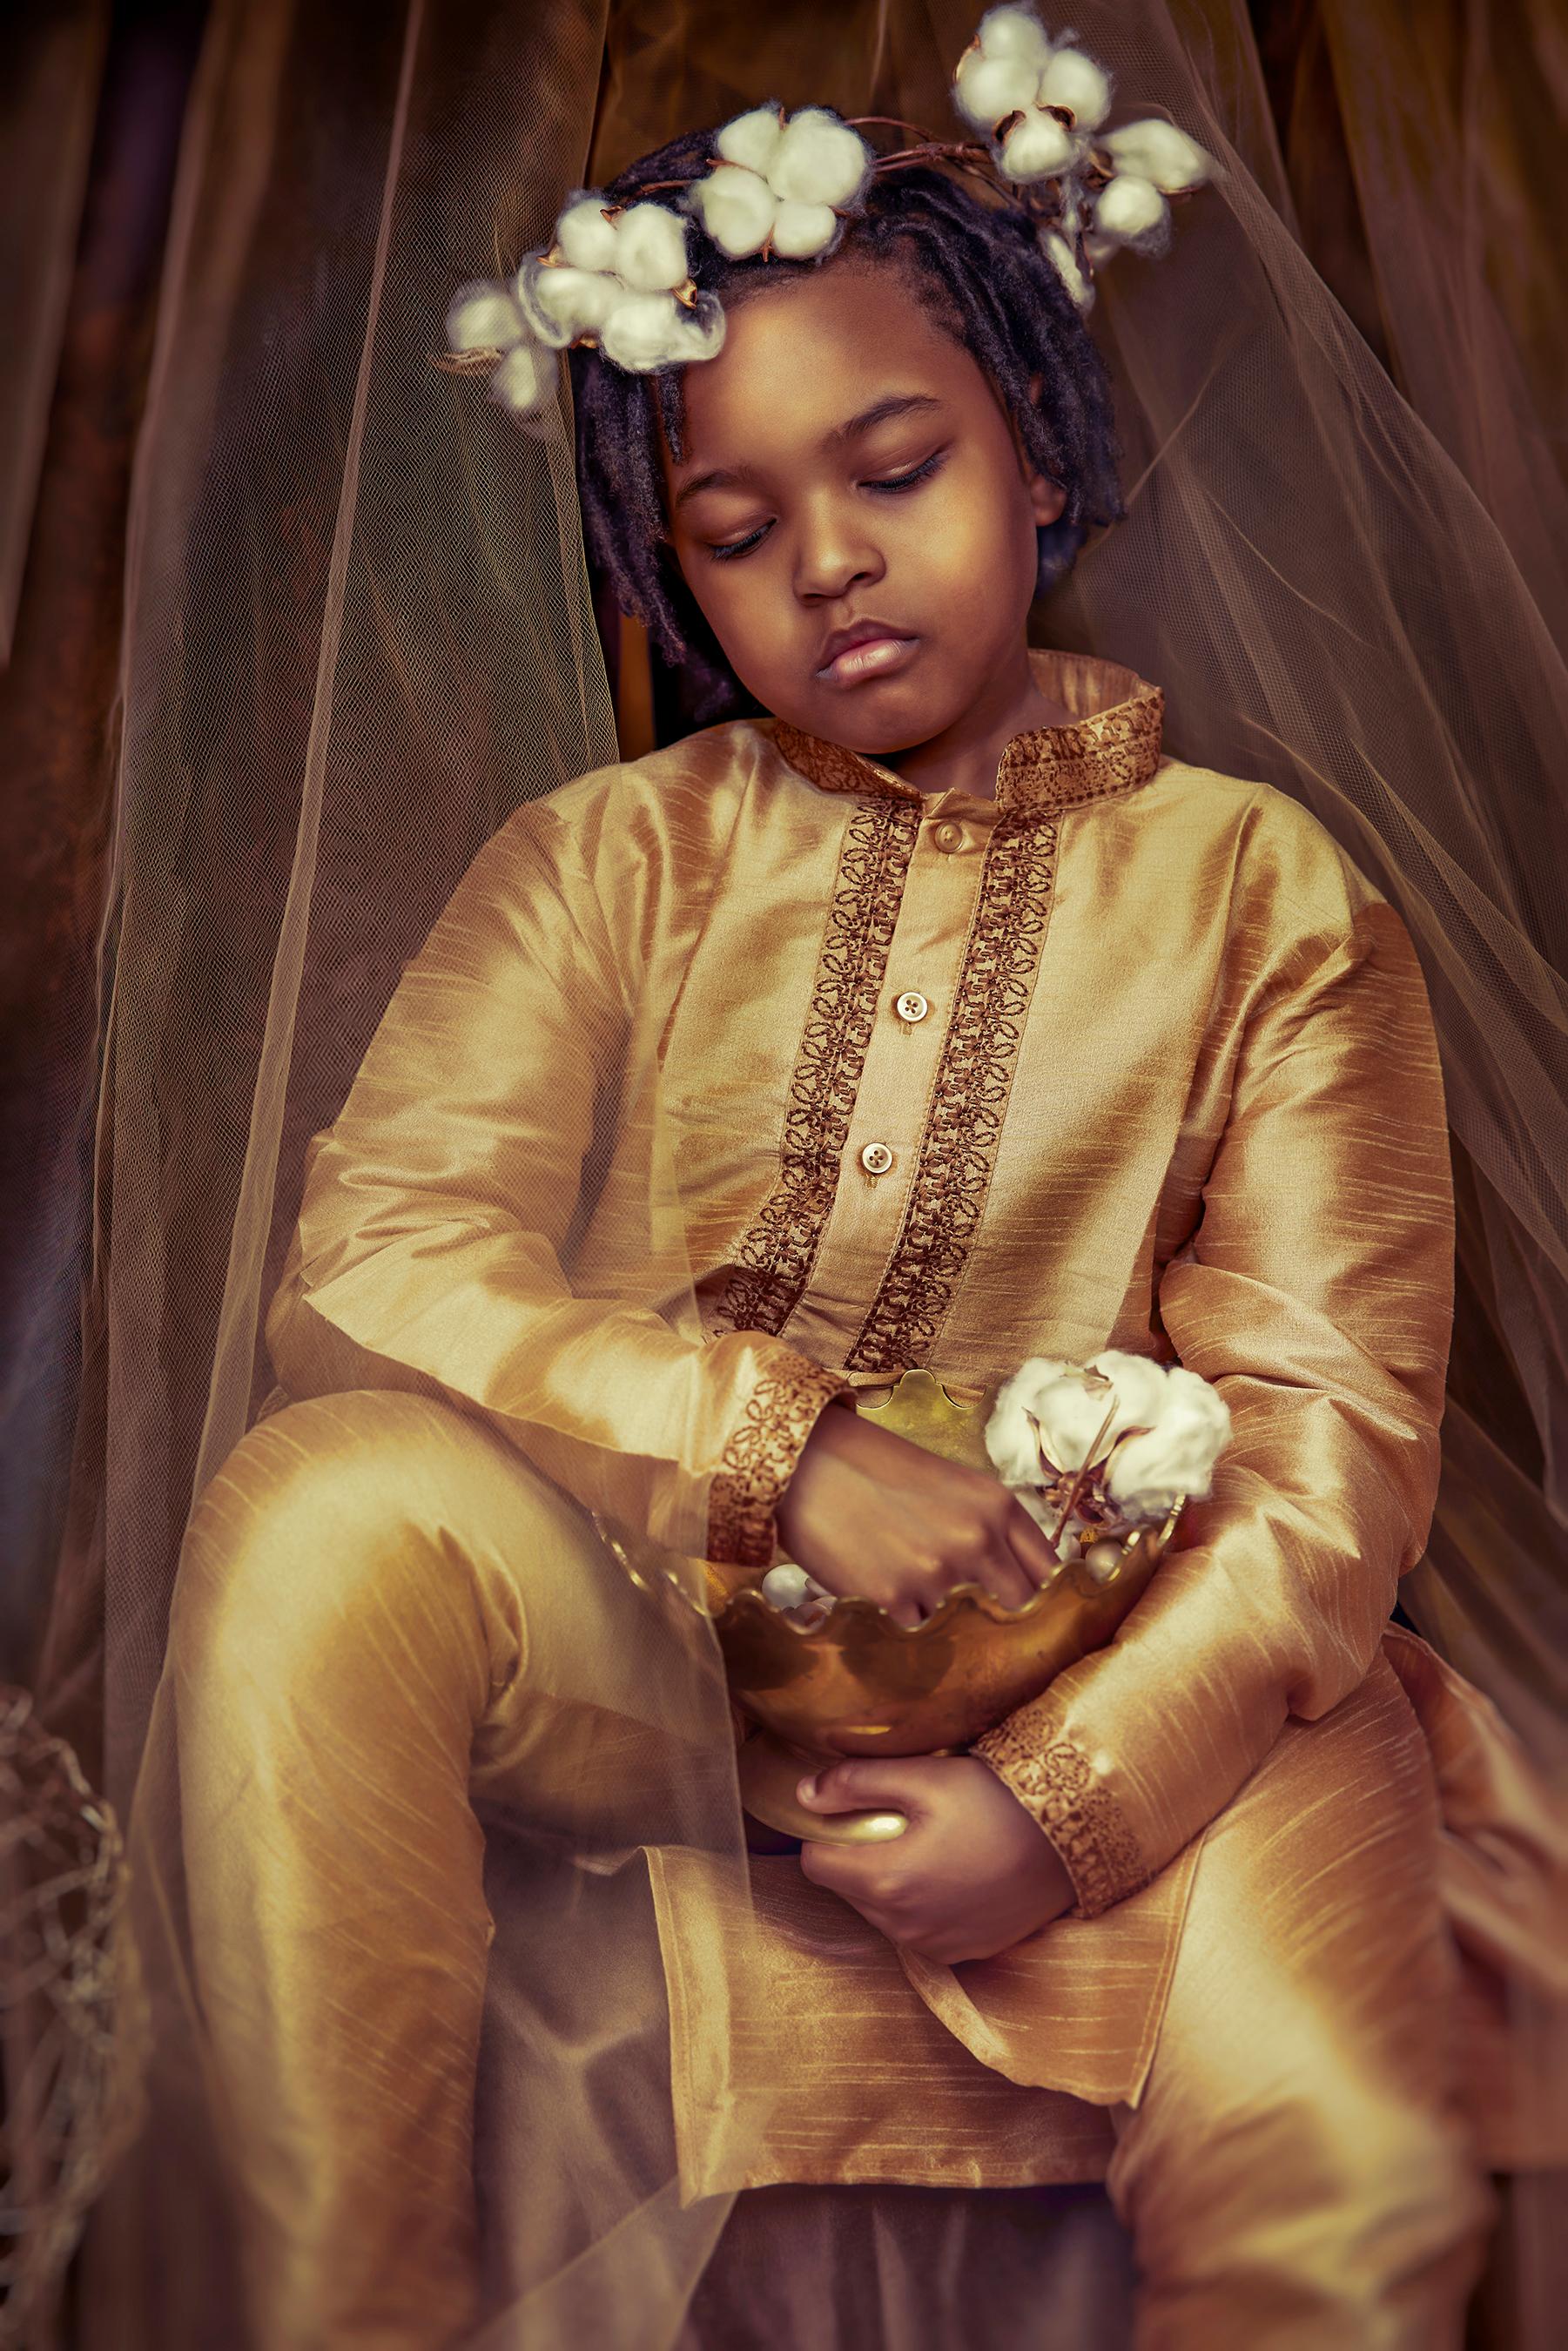 Tokie Rome-Taylor Color Photograph - "Heavy Is The Head That Wears The Crown" - contemporary portrait, Kehinde Wiley